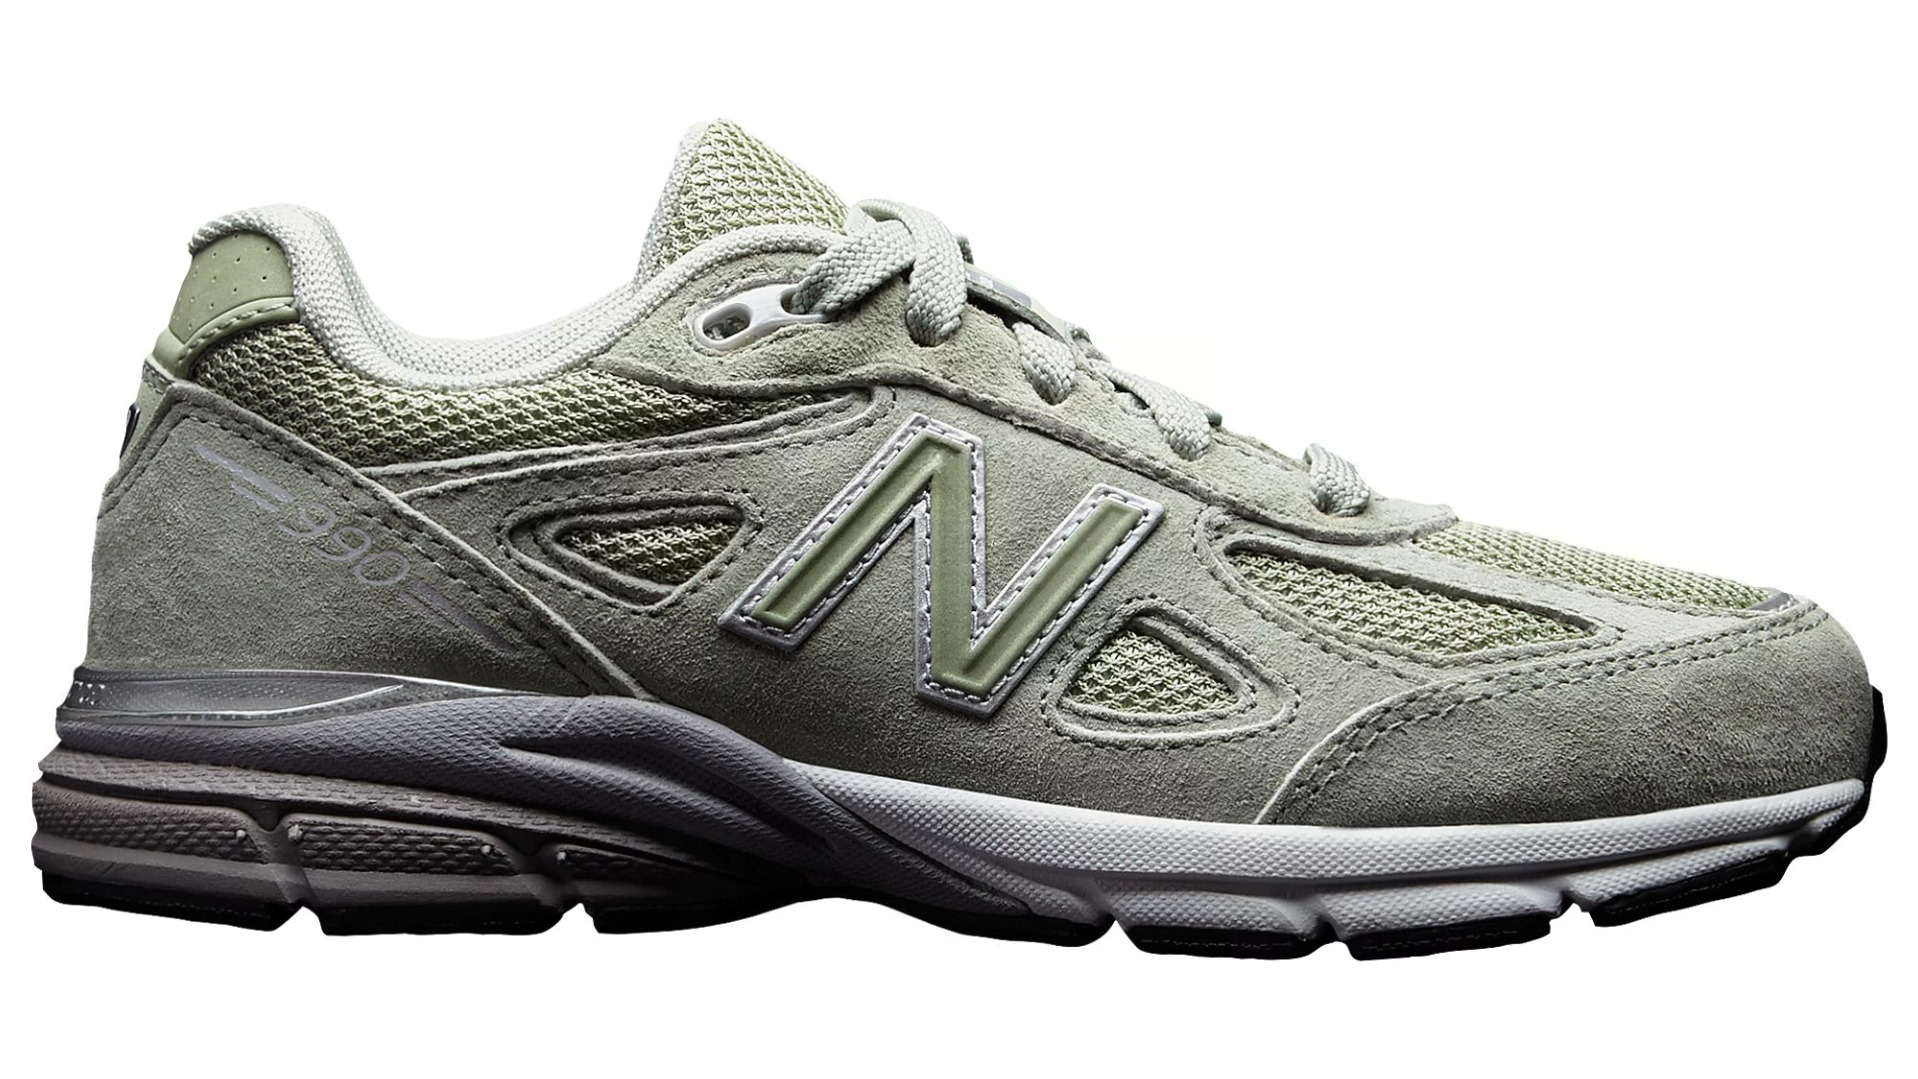 New Balance Drops the Made in USA 990 